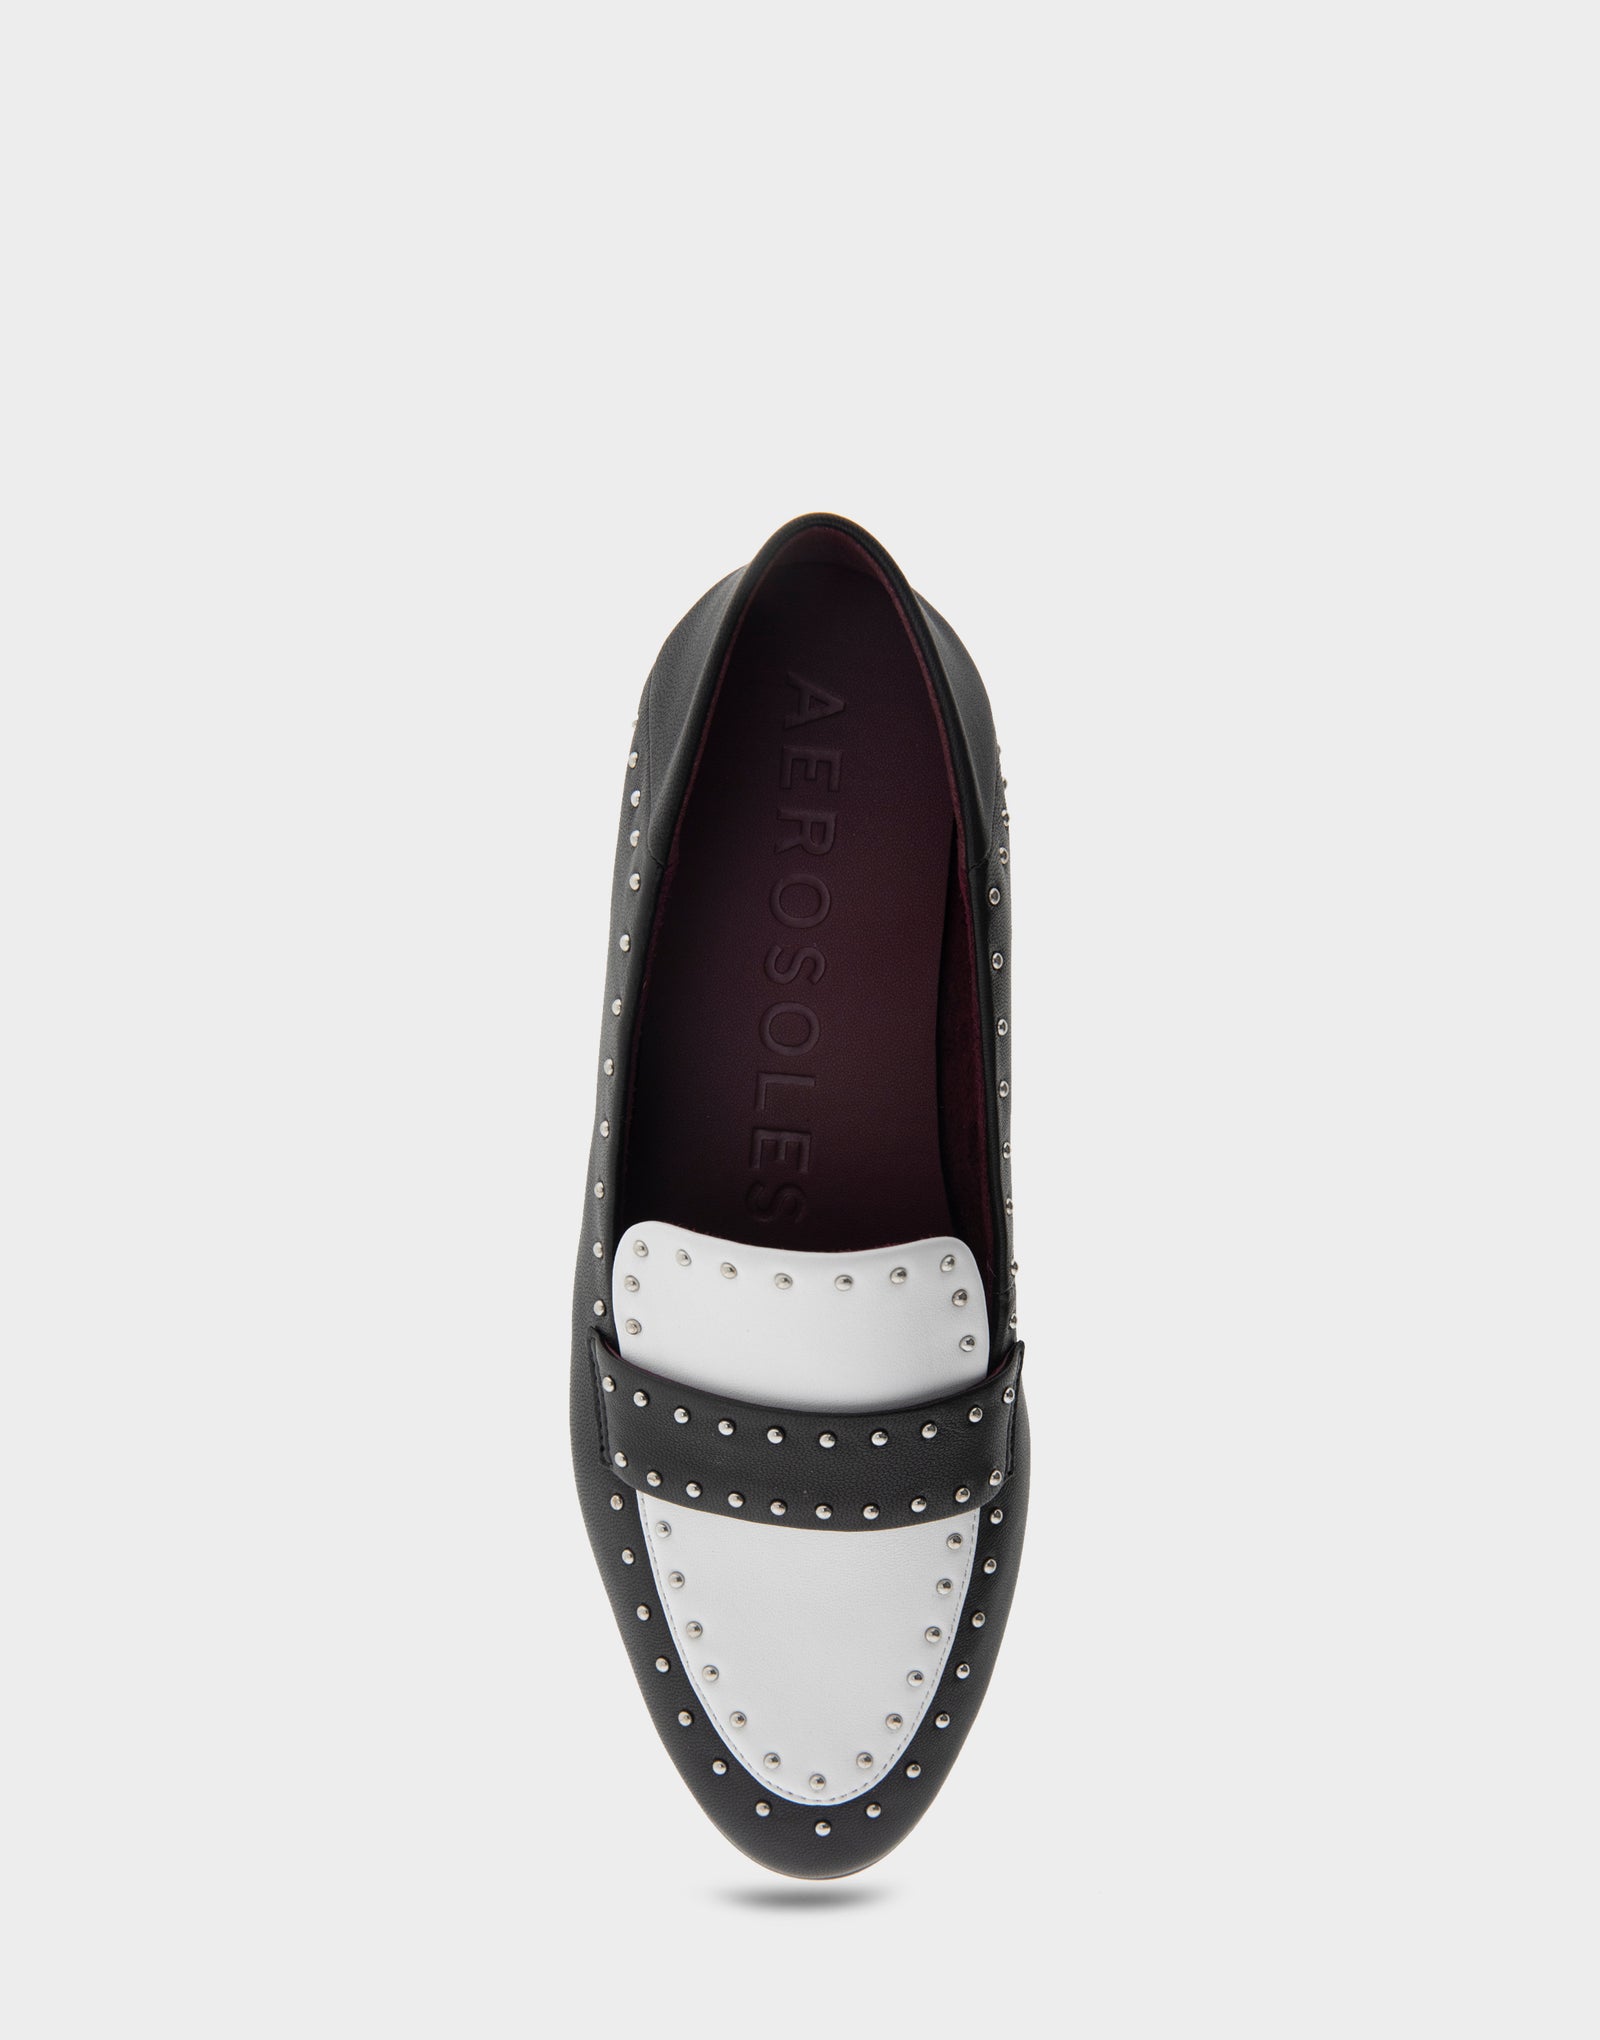 Women's Convertible Loafer in Black